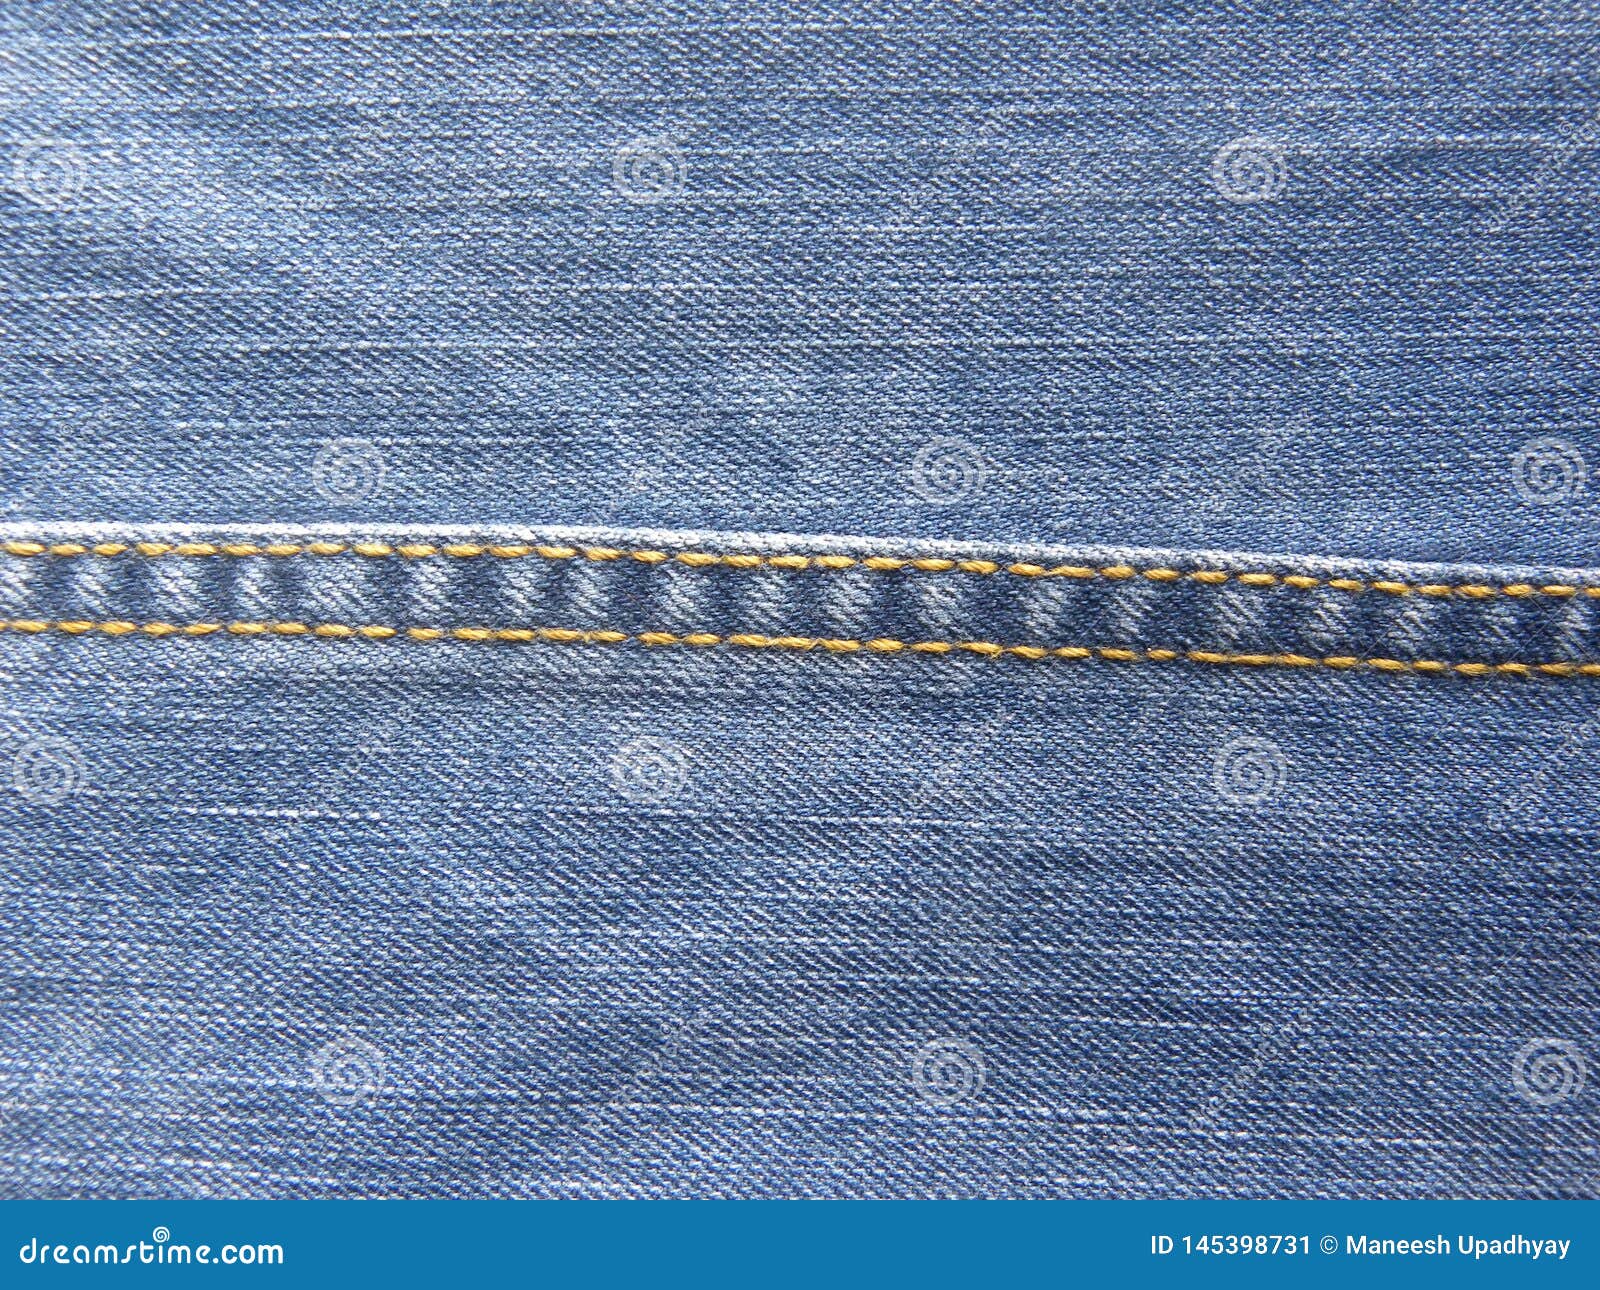 Lock Stitch stock image. Image of joint, clothes, detail - 145398731